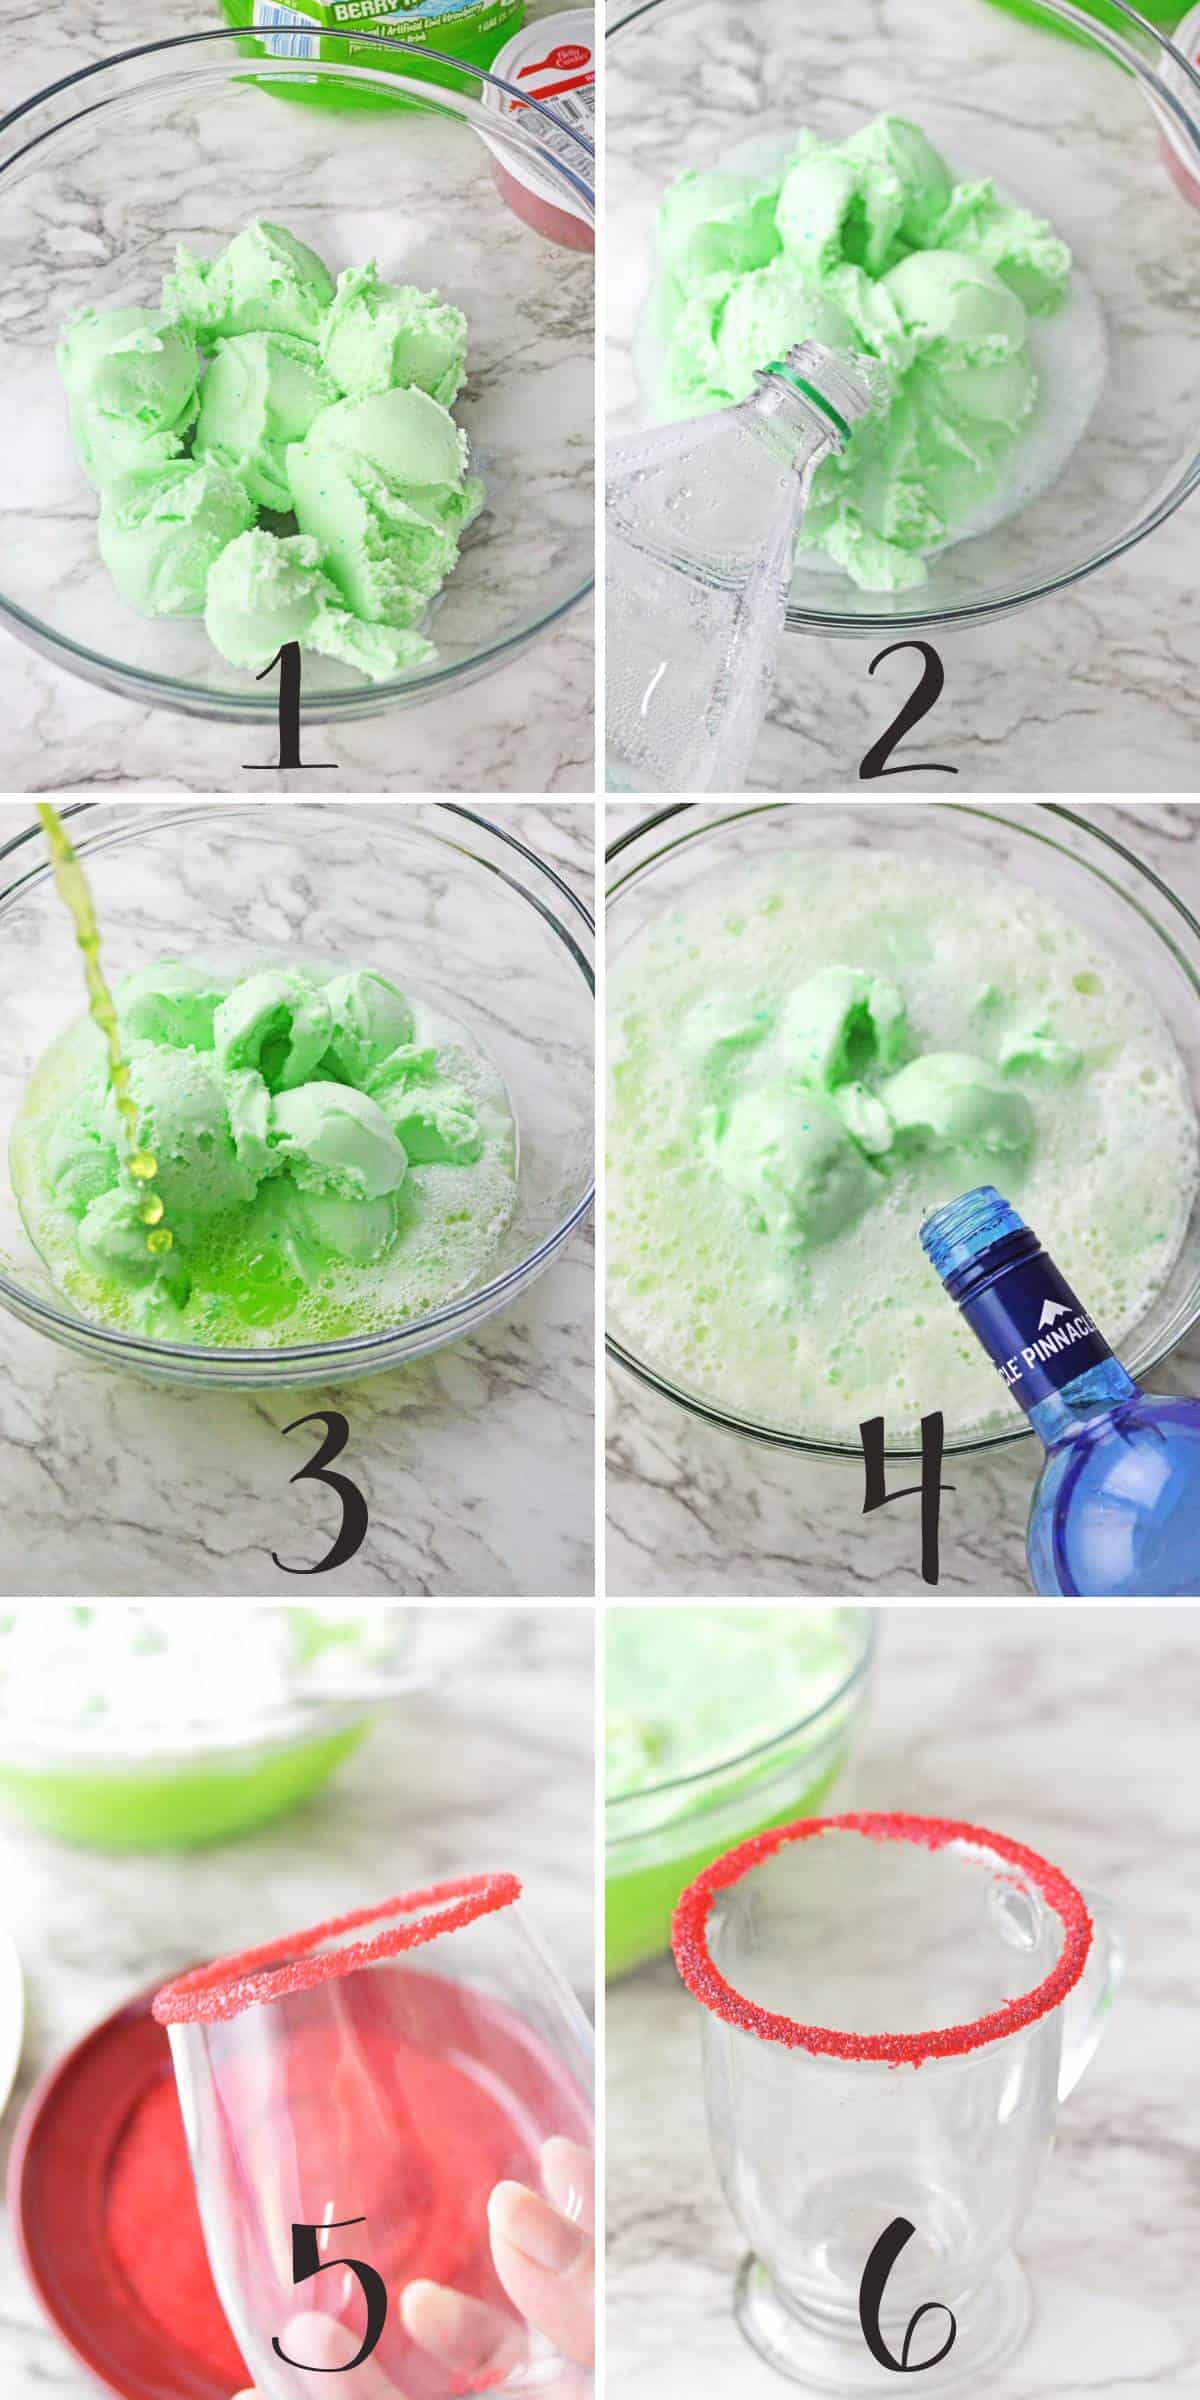 Collage image showing steps to make grinch punch recipe.